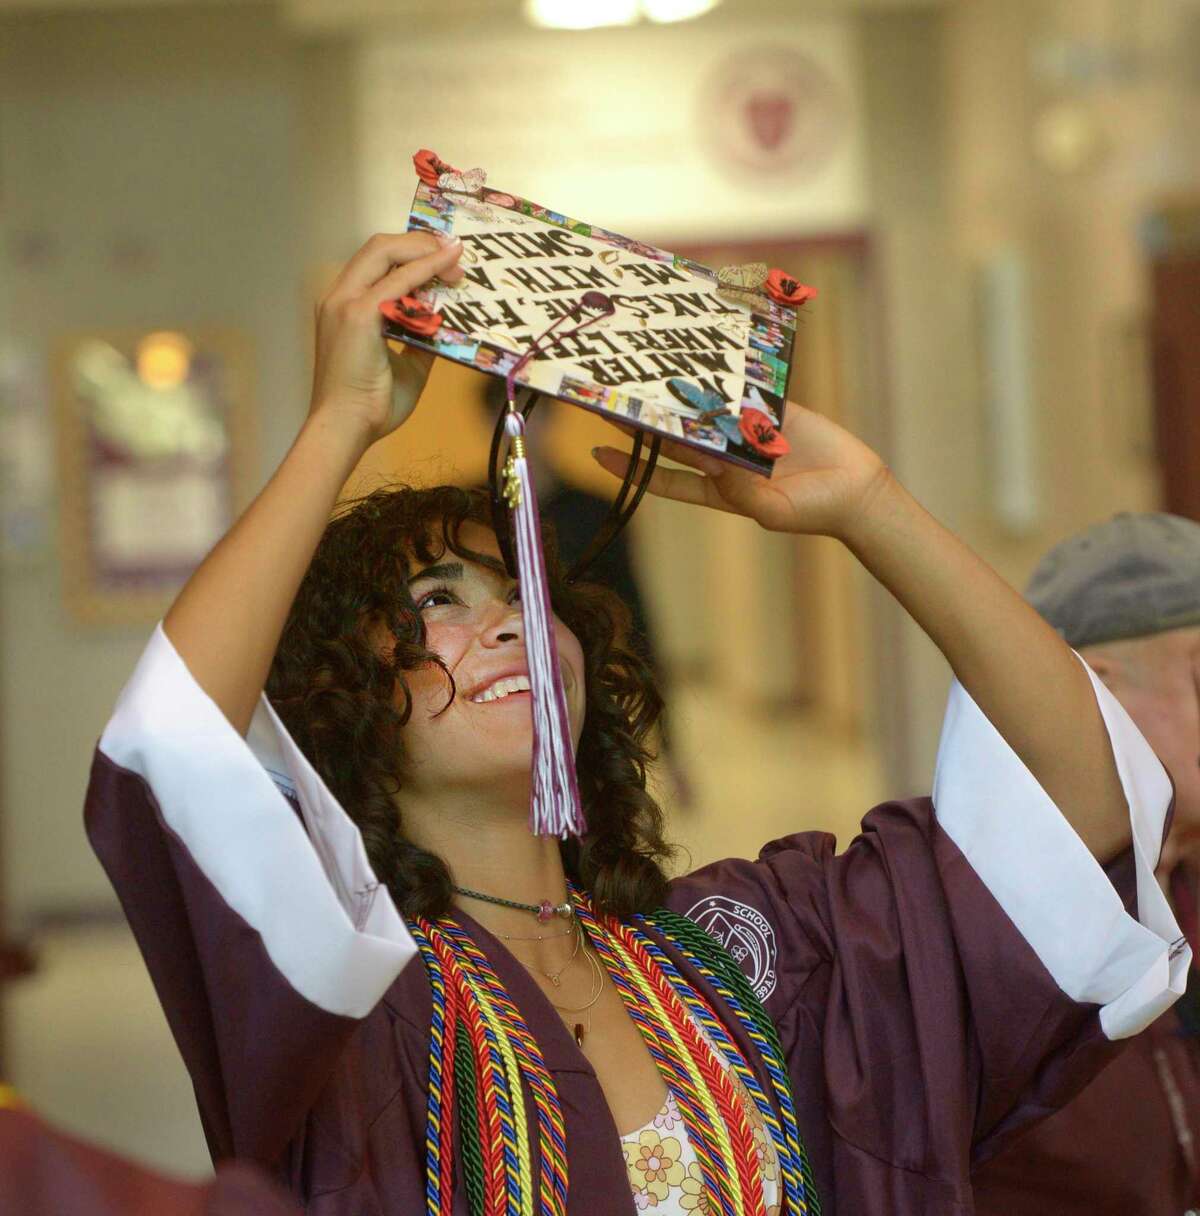 Ava Graham tries to put on her cap before the 2022 Bethel High School Graduation, Friday, June 17, 2022, Bethel, Conn.